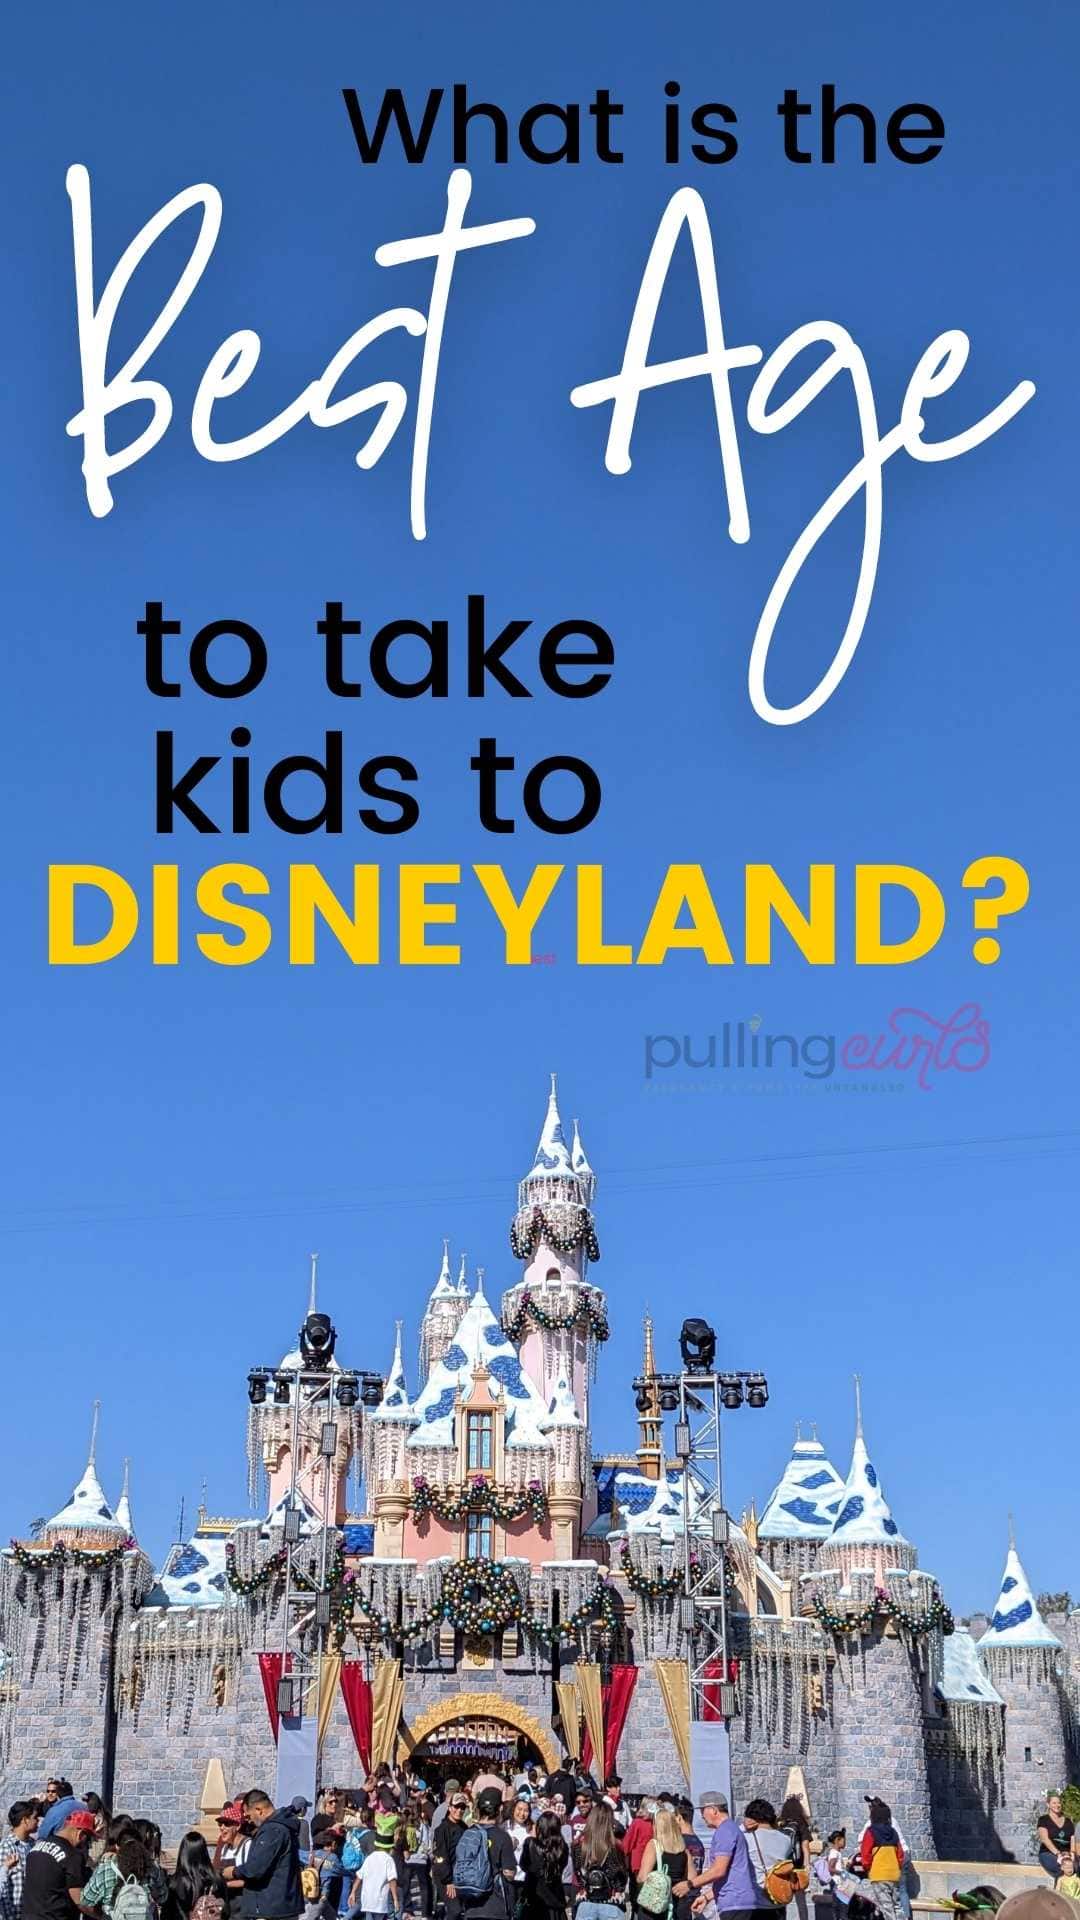 There’s no definitive answer as to what the best age is for kids to go on a Disney vacation, but there are definitely some things parents should keep in mind before they make their decision. This blog post discusses everything from crowd levels and costs to the different attractions that are available at Disneyland depending on your child’s age. Planning your trip wisely can ensure that everyone has a magical time! via @pullingcurls